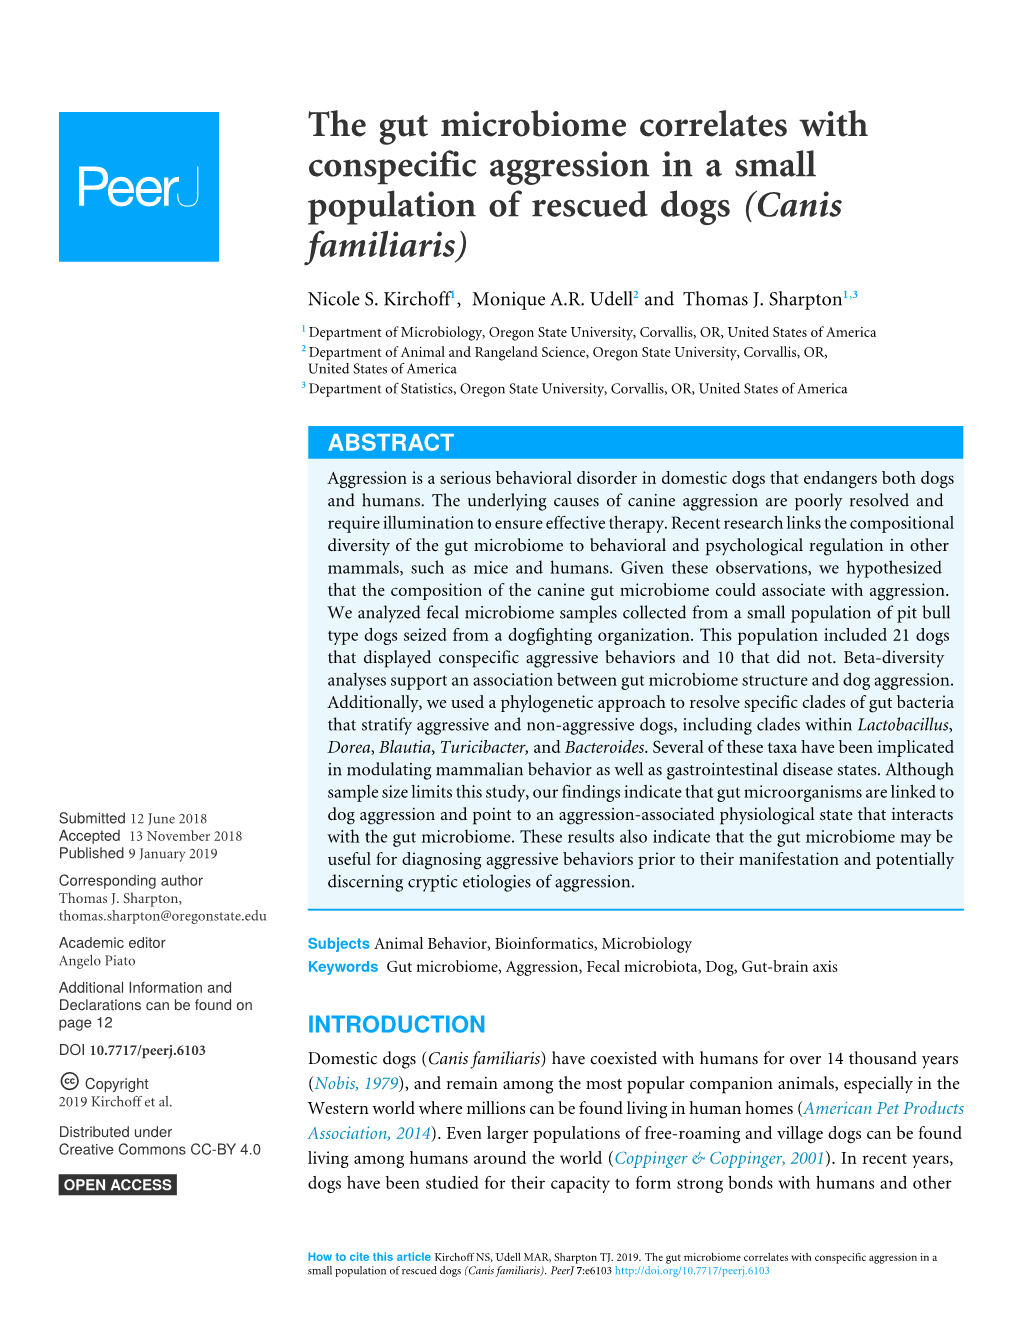 The Gut Microbiome Correlates with Conspecific Aggression in a Small Population of Rescued Dogs (Canis Familiaris)